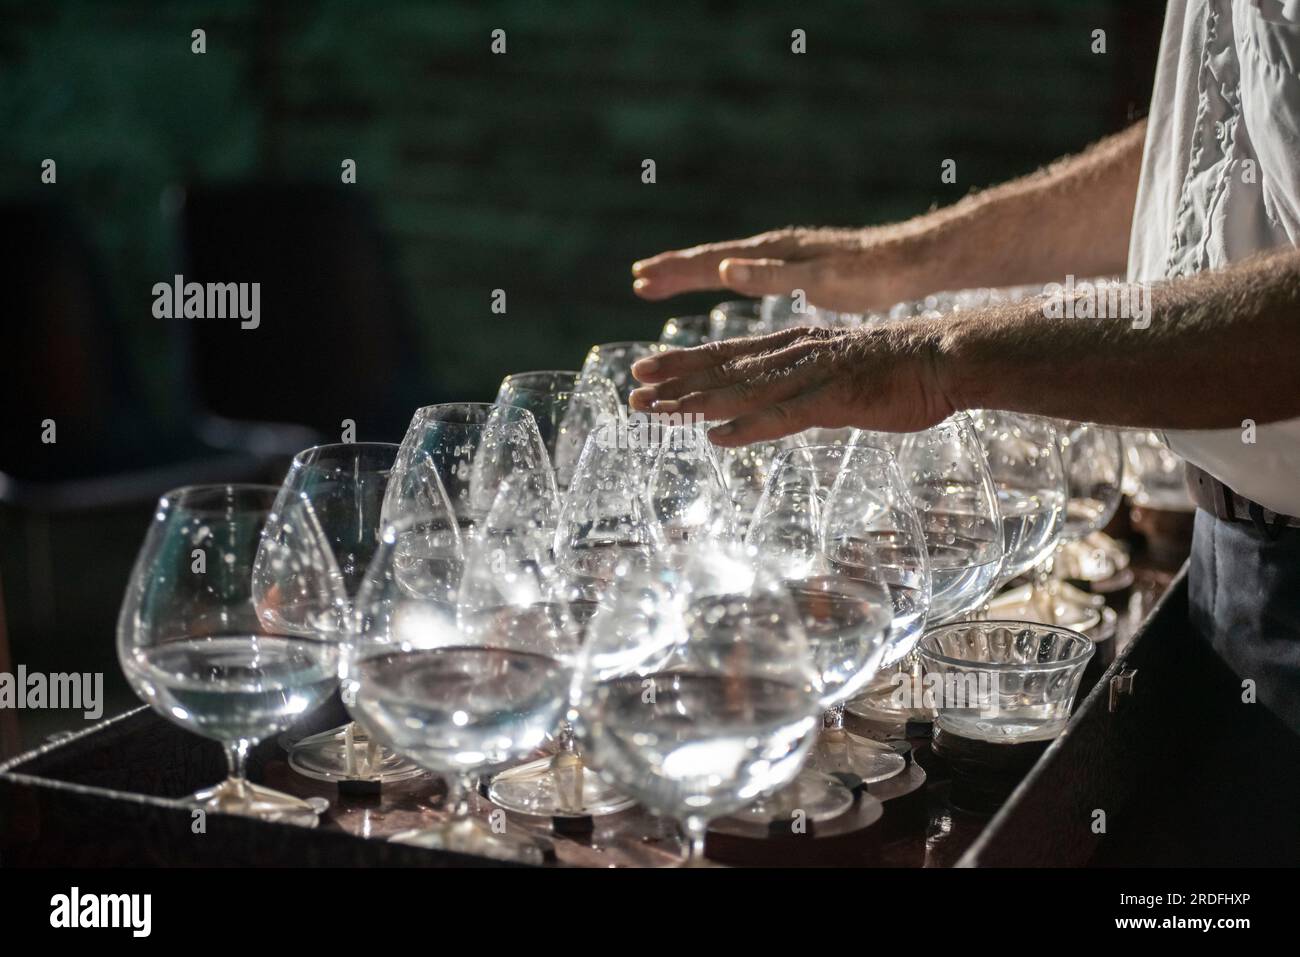 https://c8.alamy.com/comp/2RDFHXP/musician-plays-a-series-of-crystal-glasses-which-make-up-a-rare-instrument-called-the-glass-harp-2RDFHXP.jpg